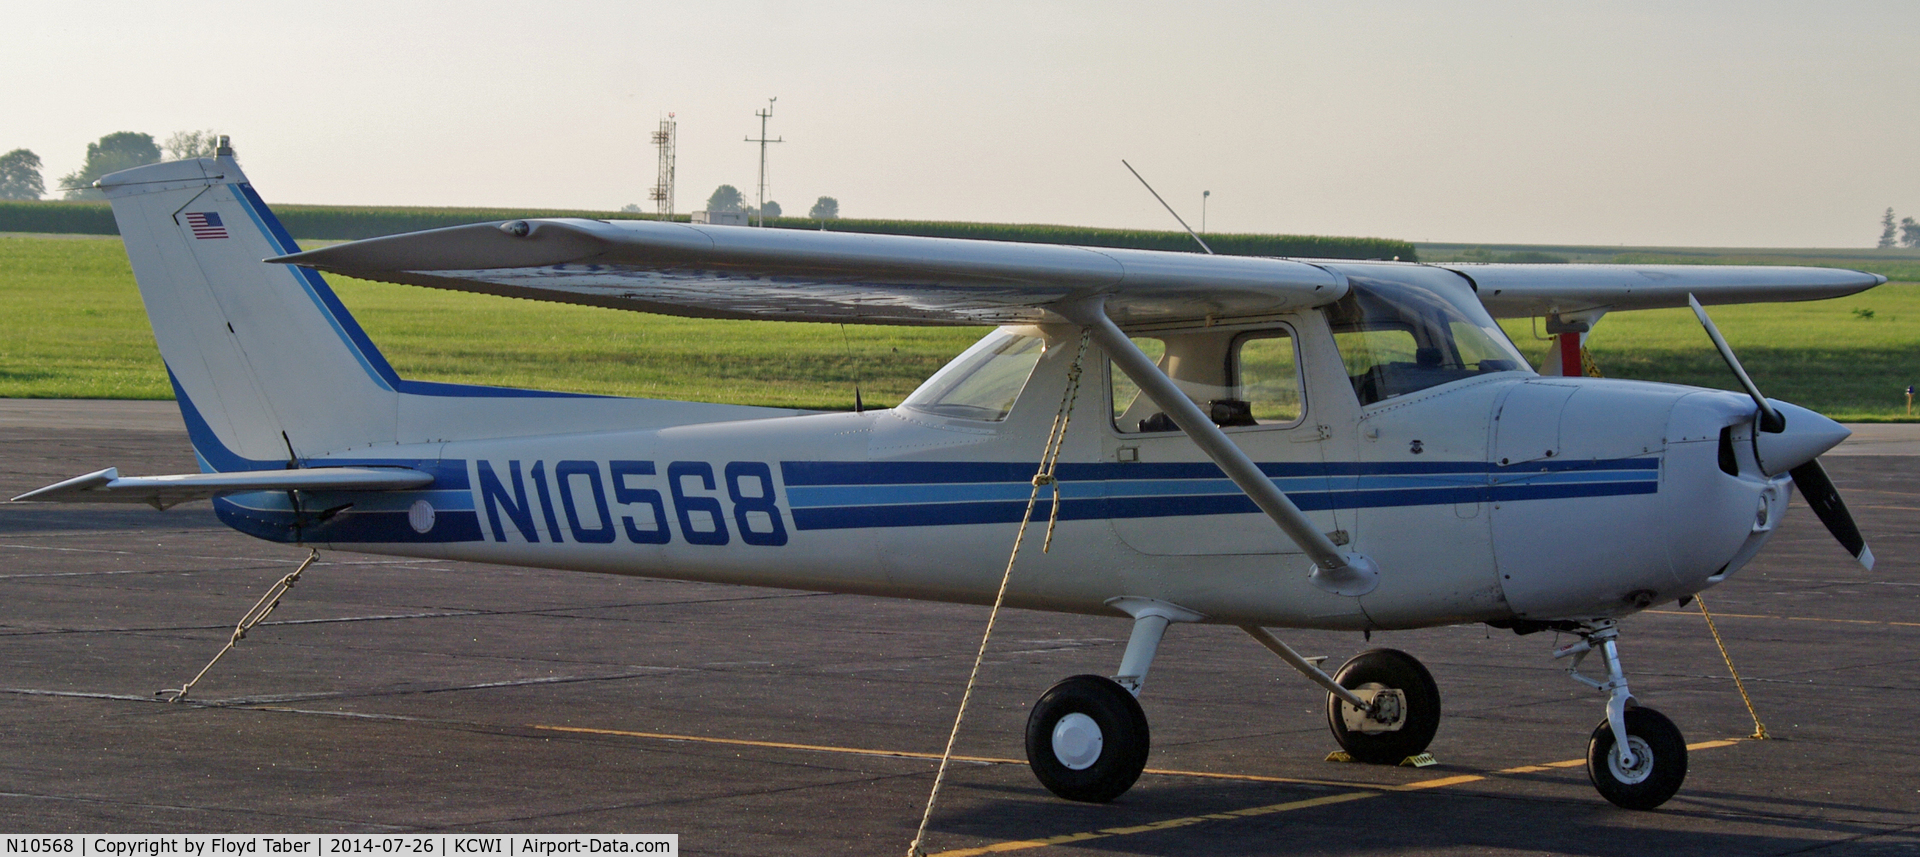 N10568, 1973 Cessna 150L C/N 15074914, Sitting at the Clinton Airport for the Cessna 150 fly in